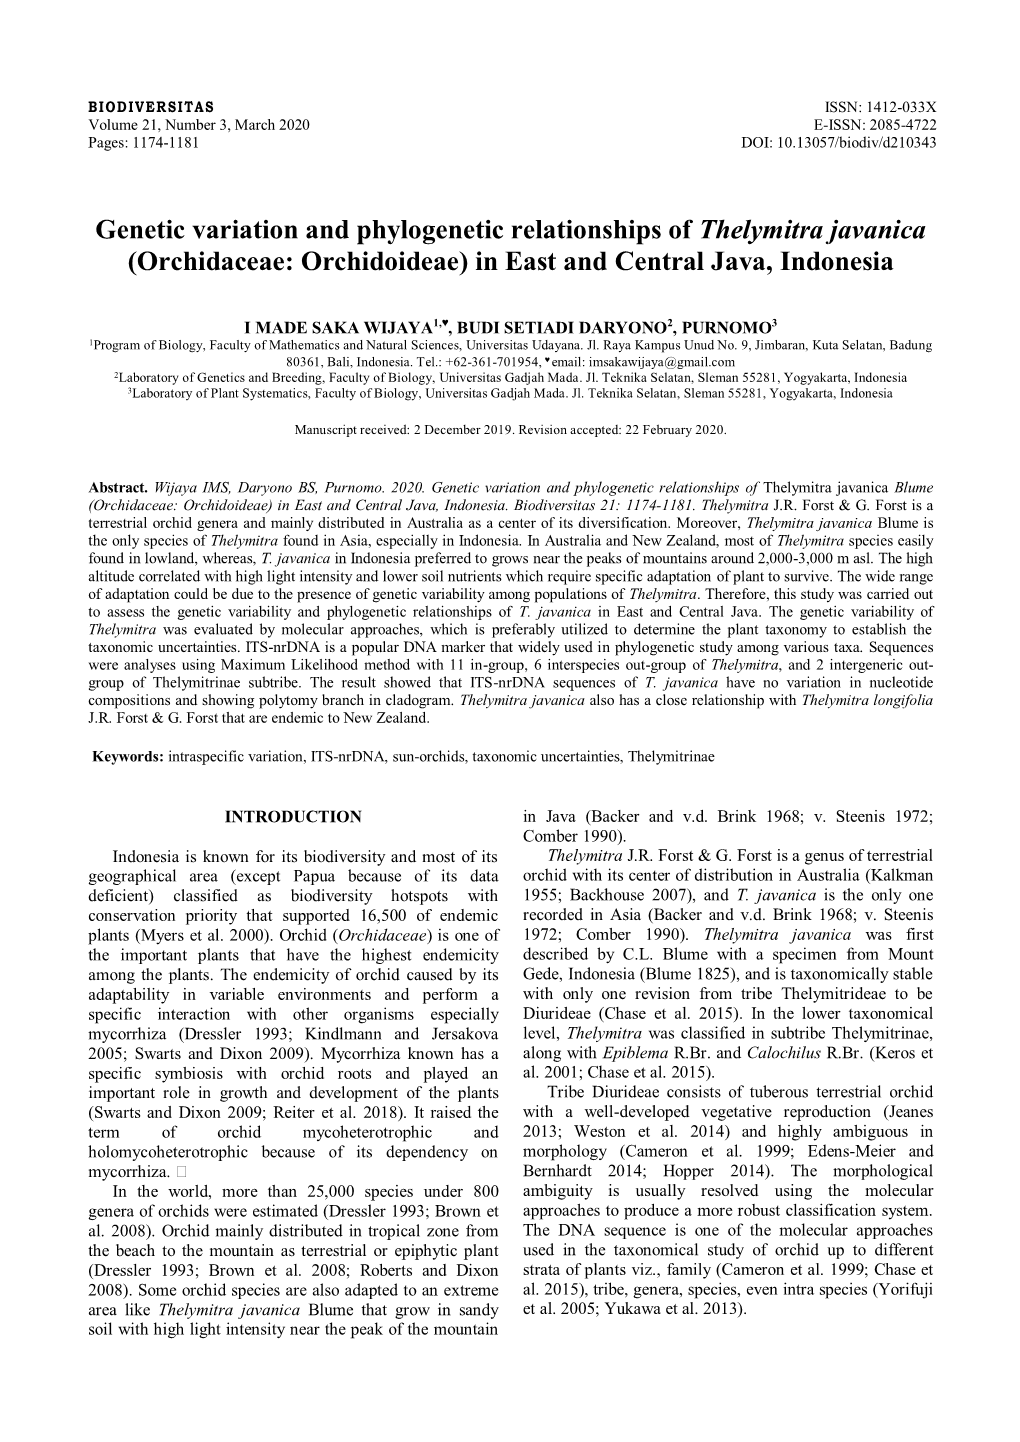 Genetic Variation and Phylogenetic Relationships of Thelymitra Javanica (Orchidaceae: Orchidoideae) in East and Central Java, Indonesia